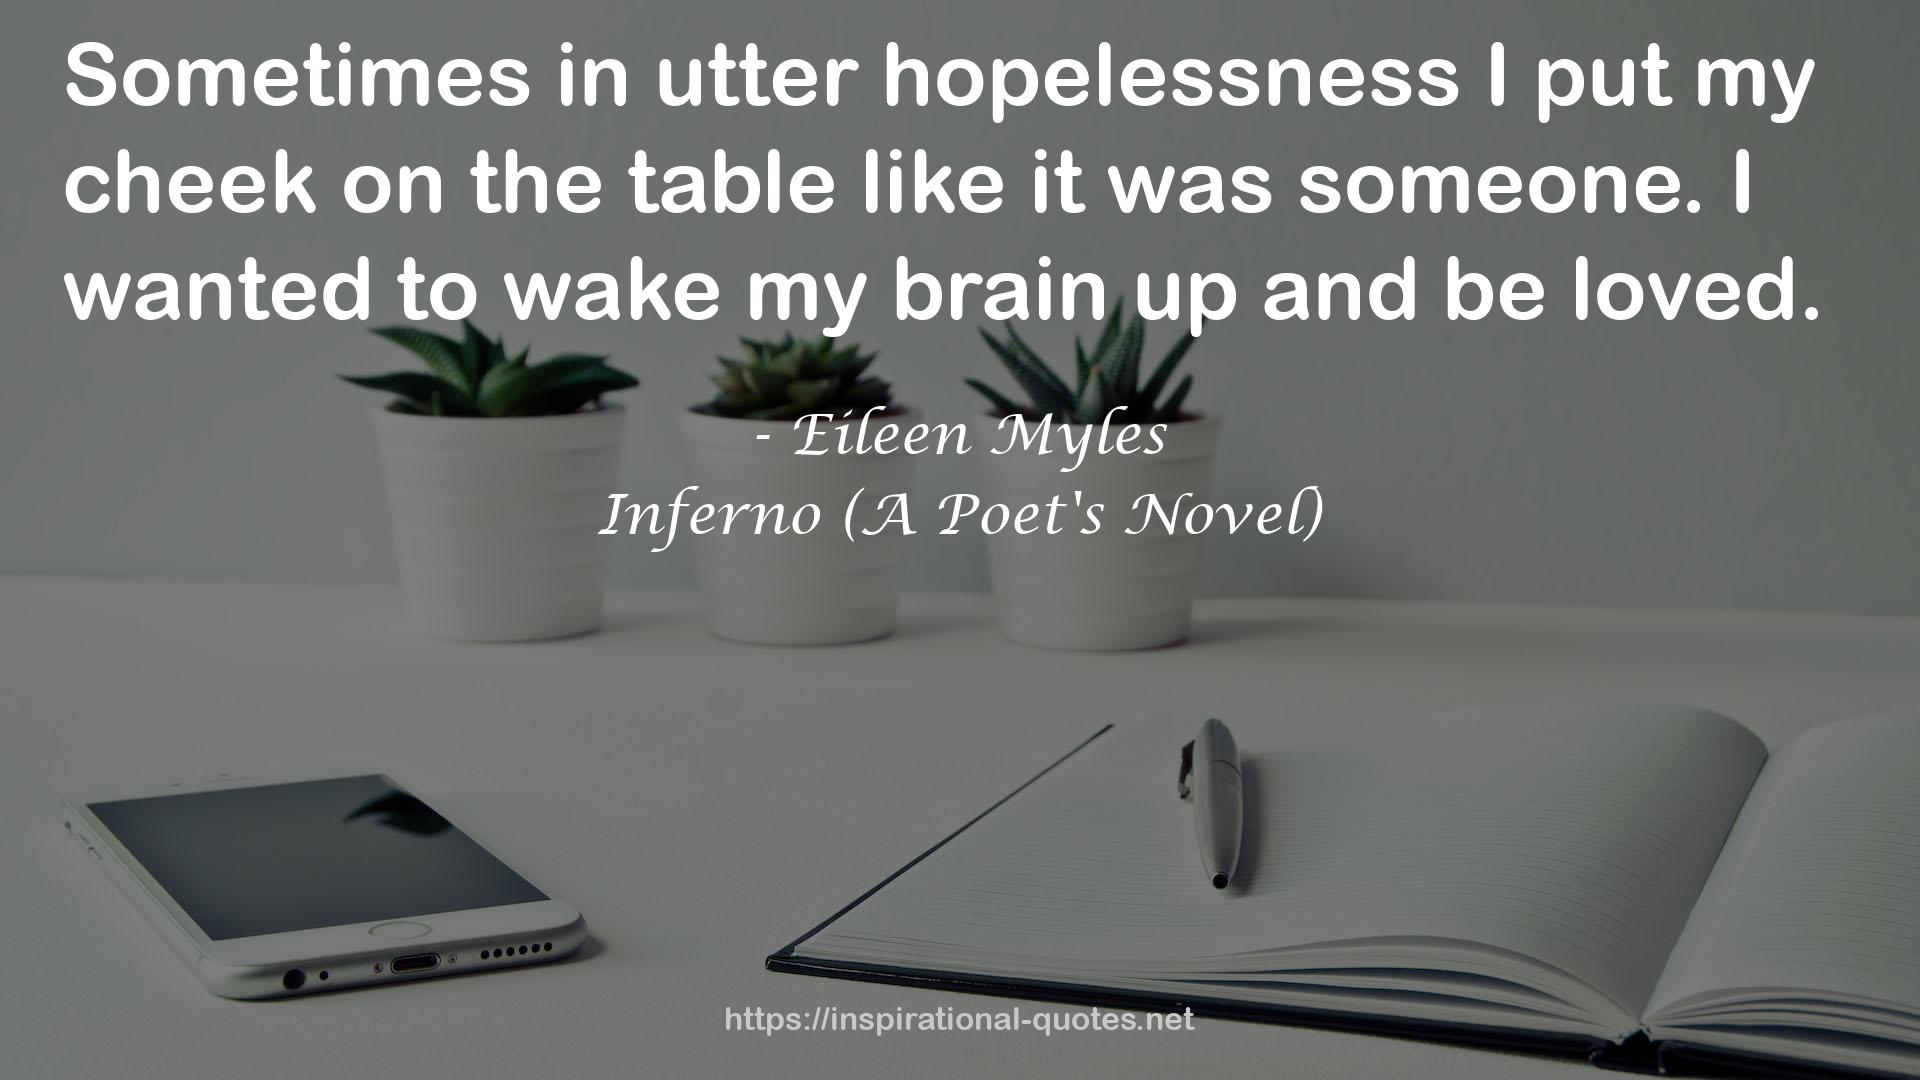 Inferno (A Poet's Novel) QUOTES